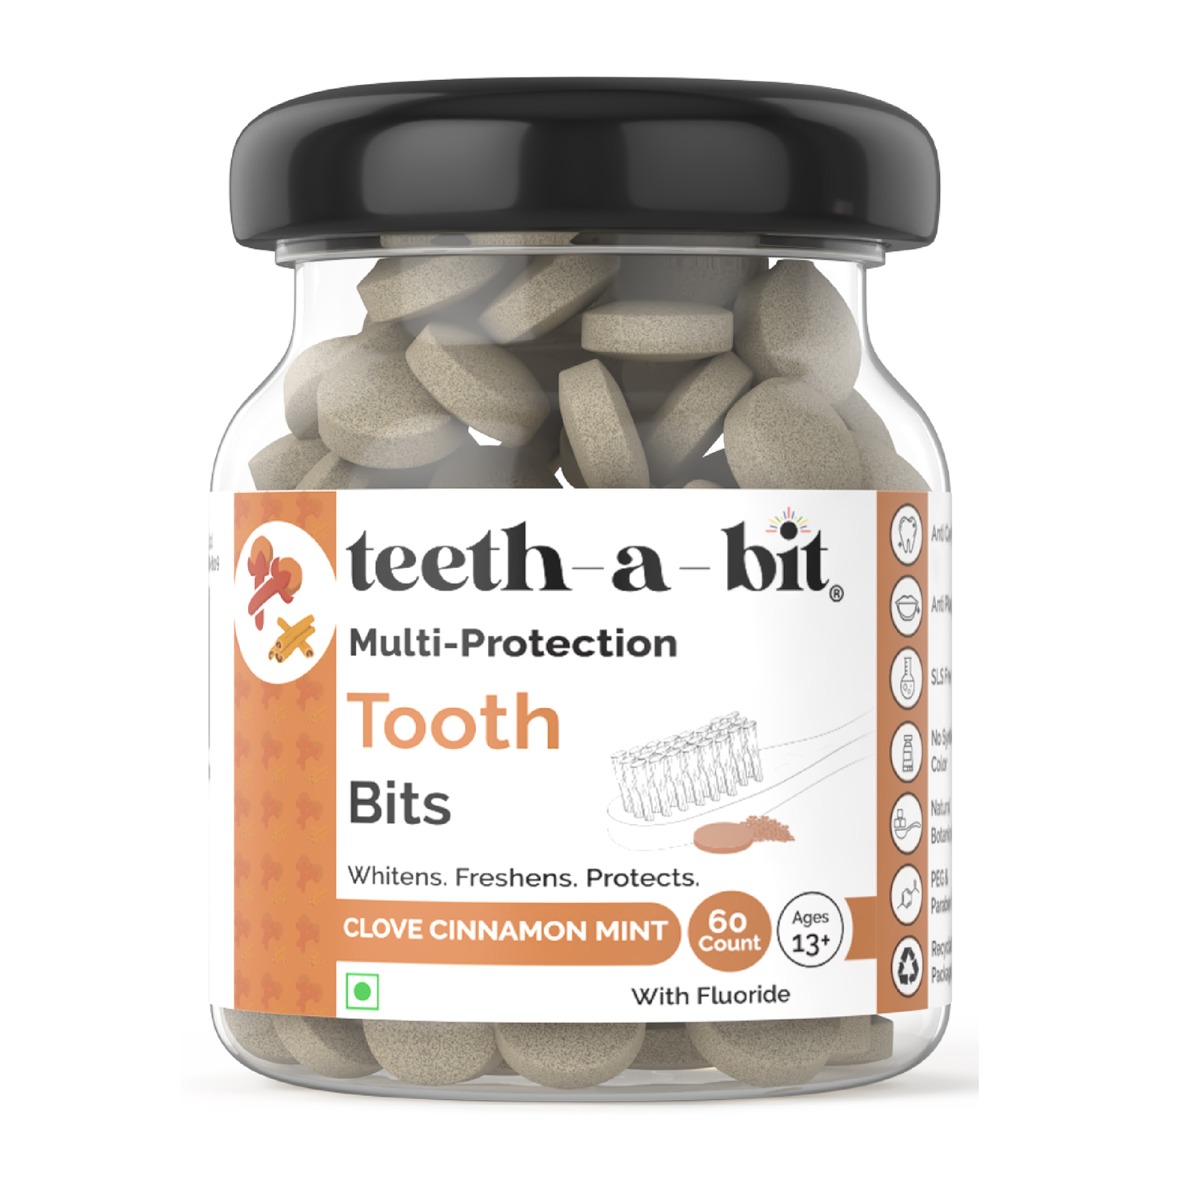 teeth-a-bit Multi-Protection Clove Cinnamon Mint Tooth Bits, 60 Count